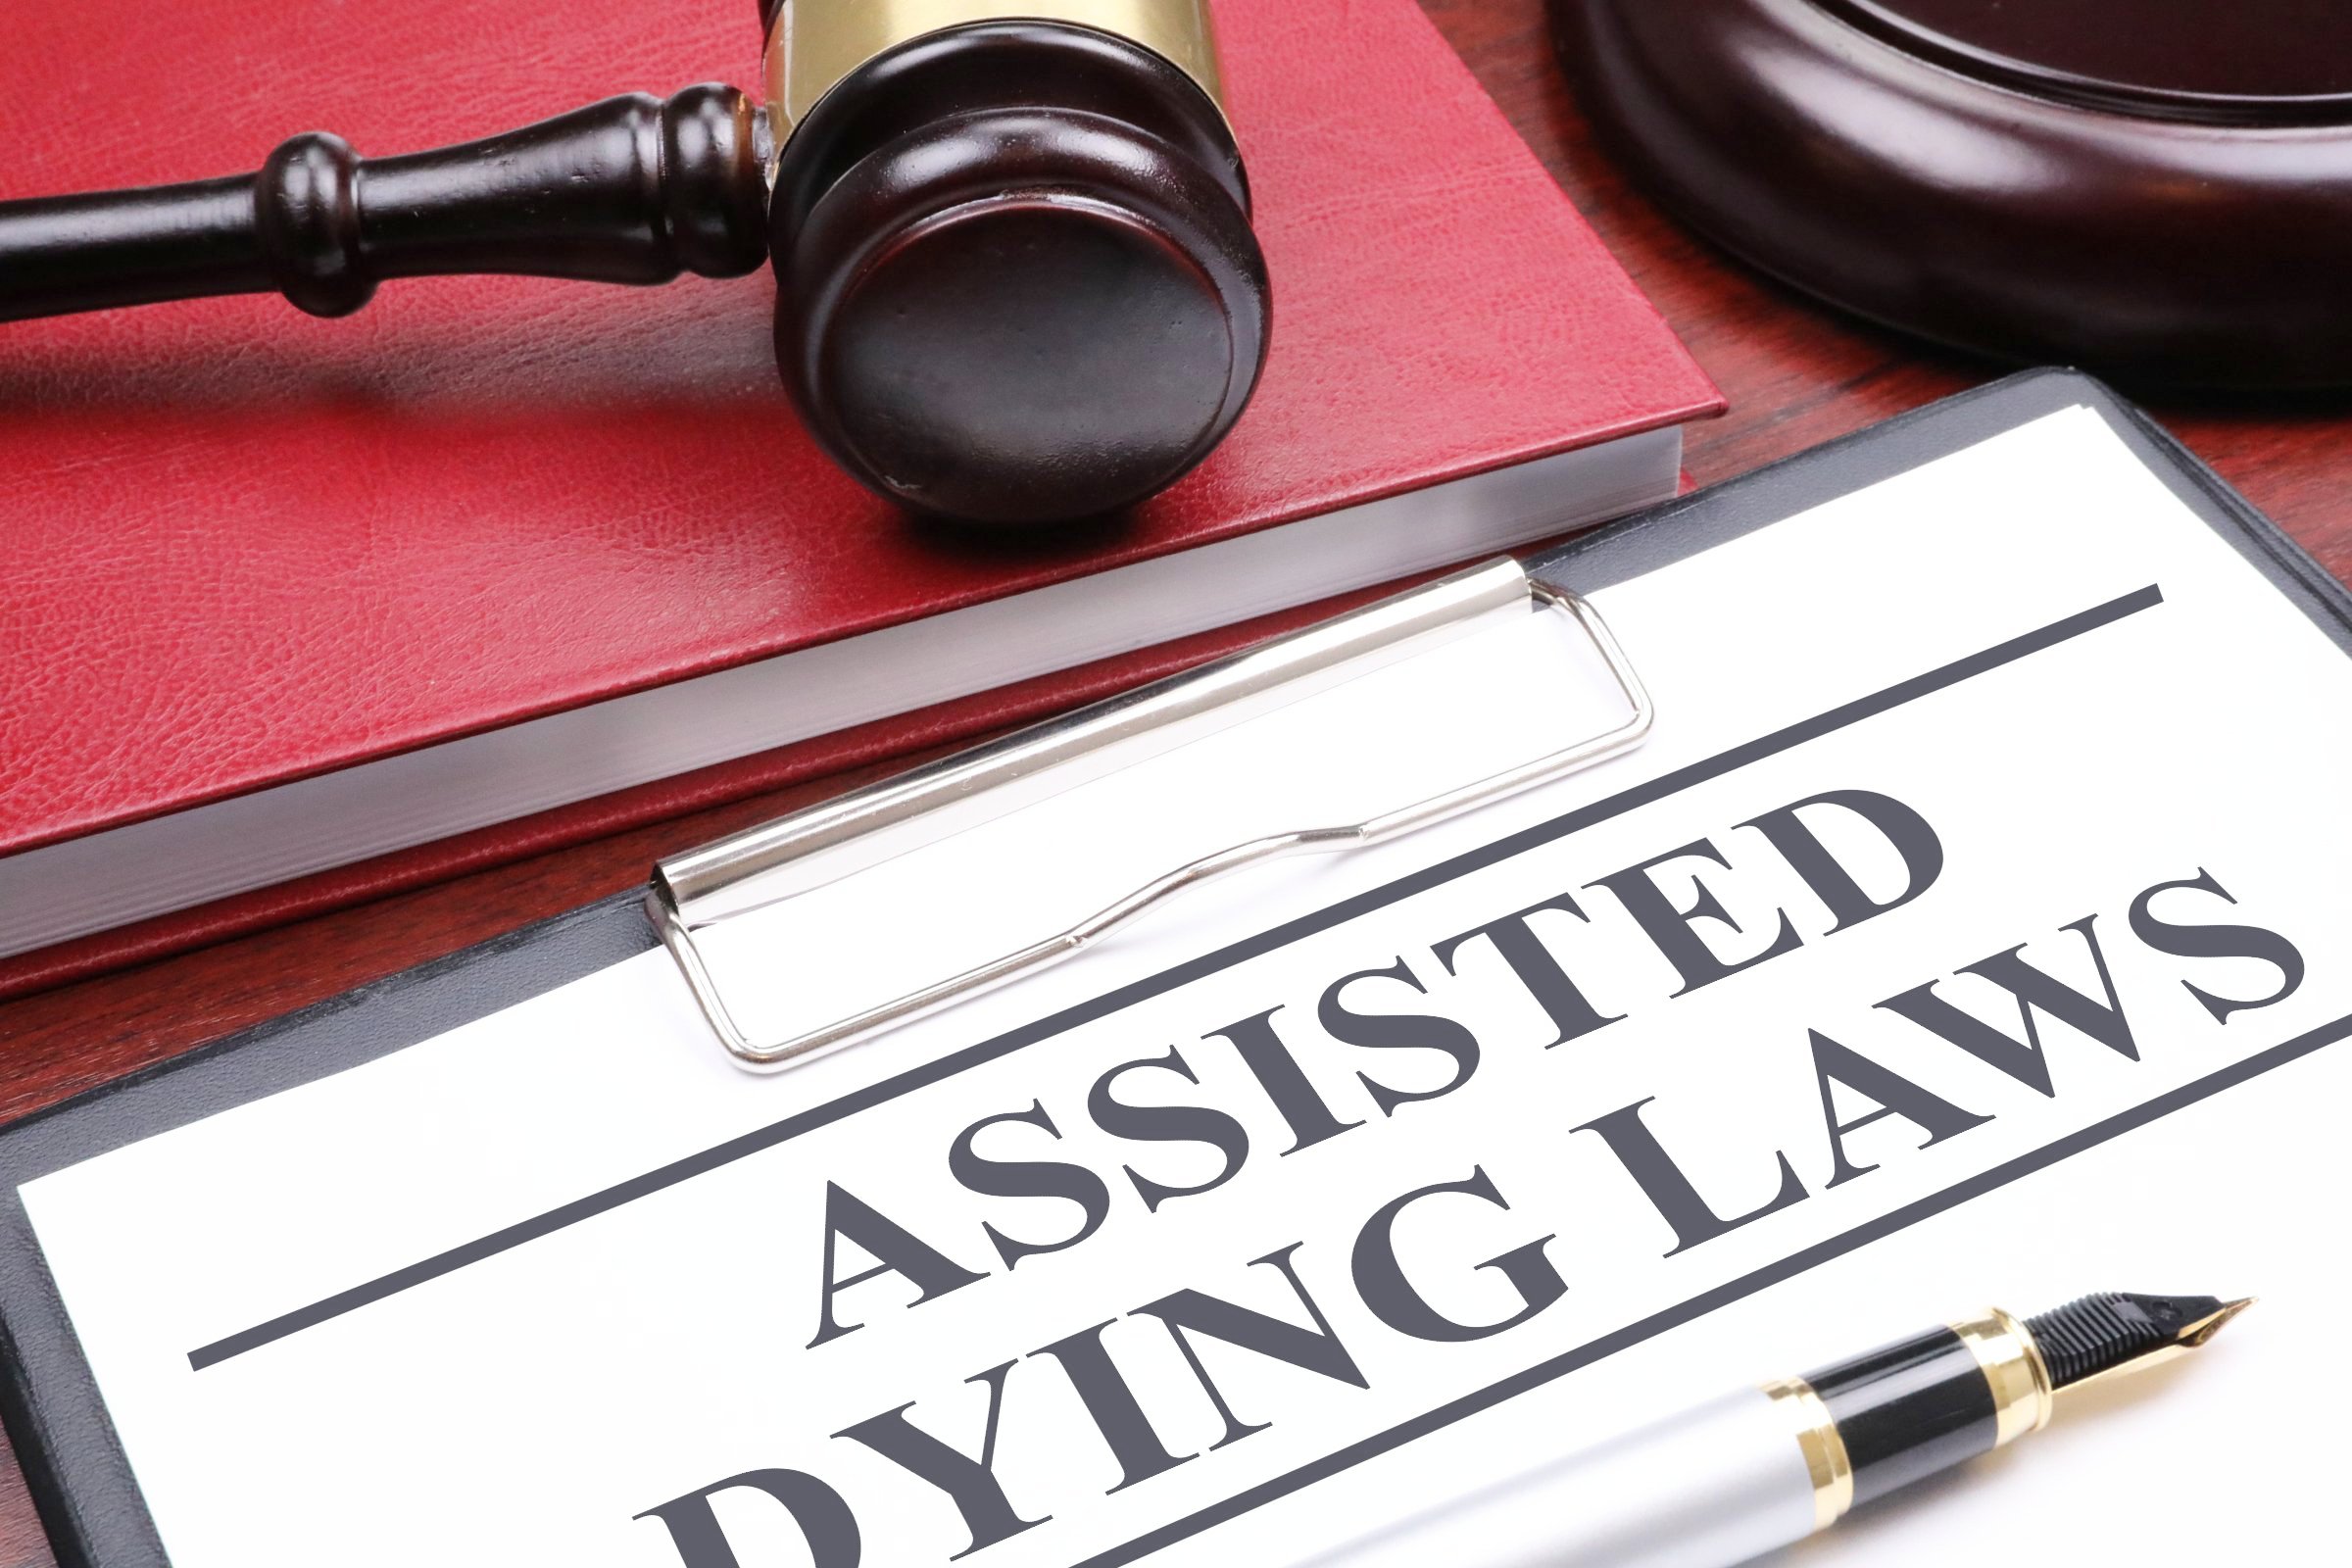 assisted dying laws